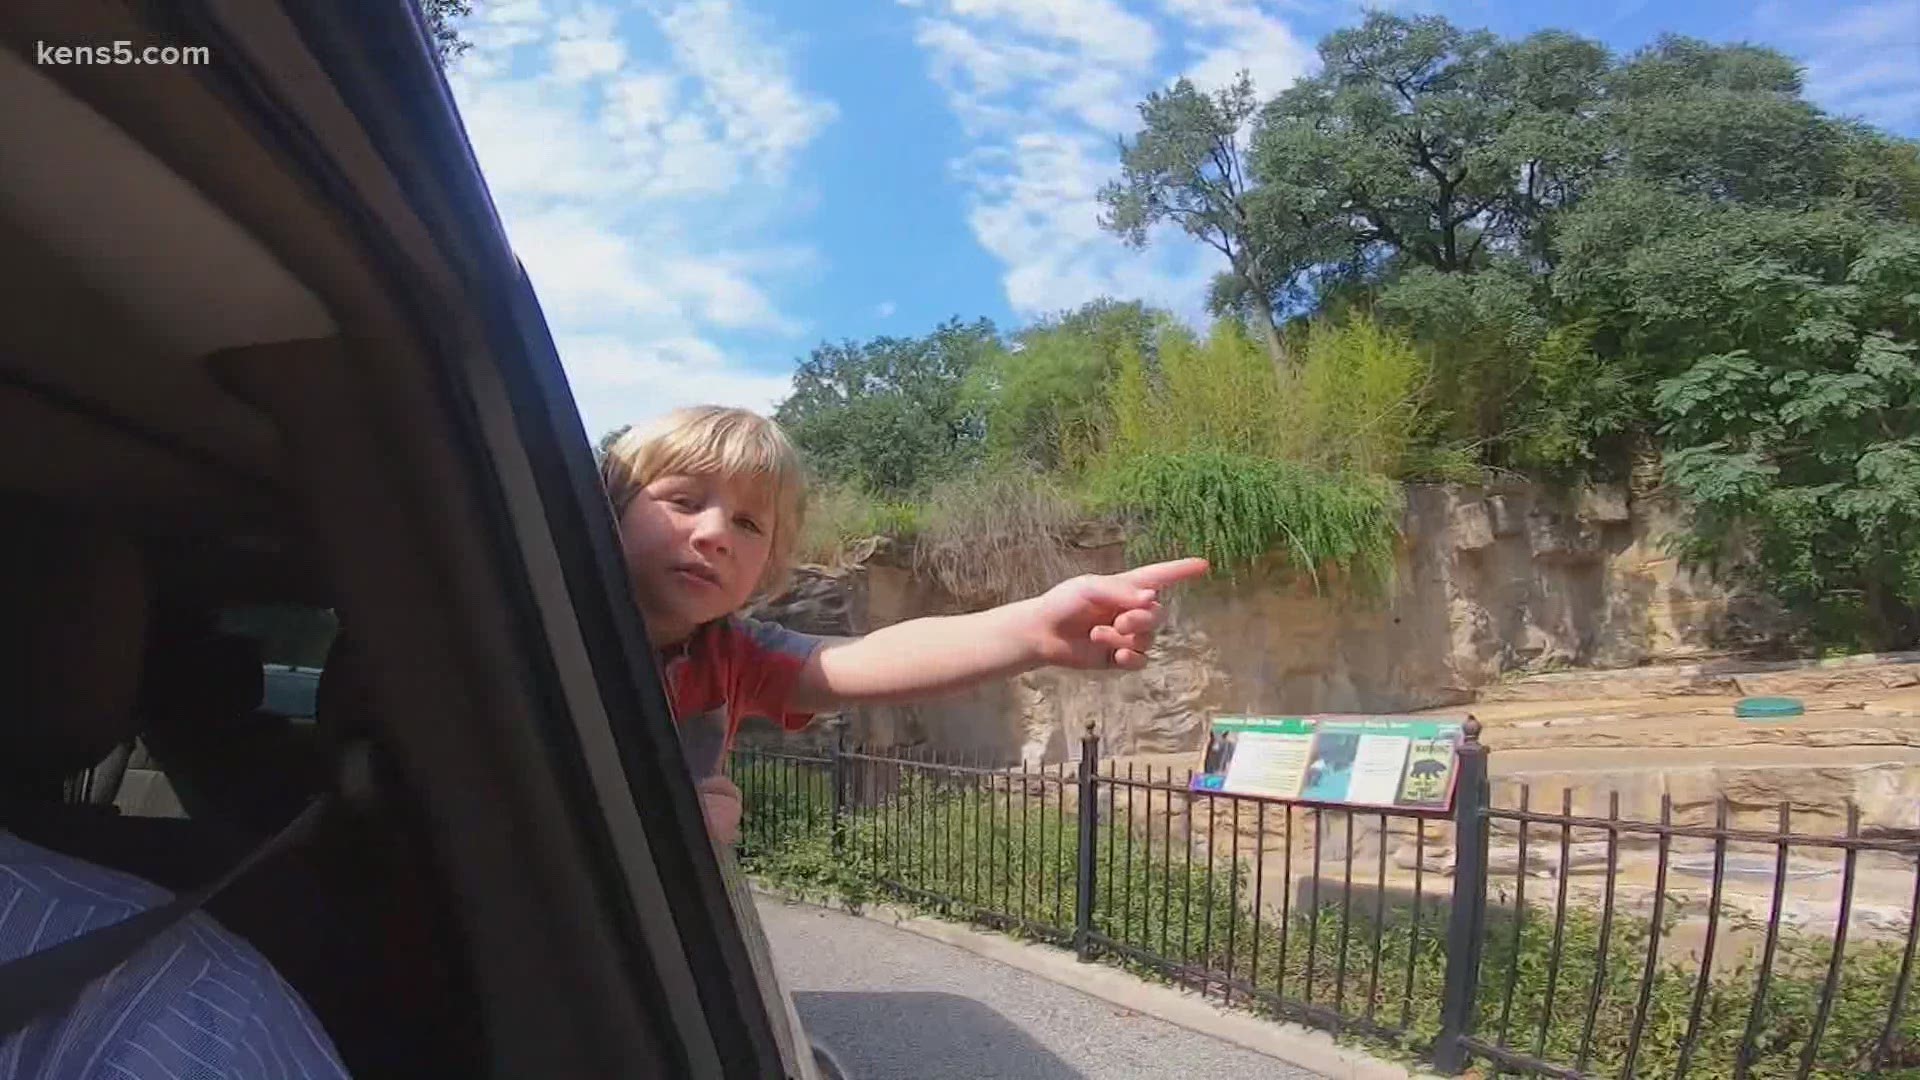 The drive-thru zoo in San Antonio started during coronavirus lockdowns, but was so popular, the zoo kept it going even after the zoo opened to visitors.